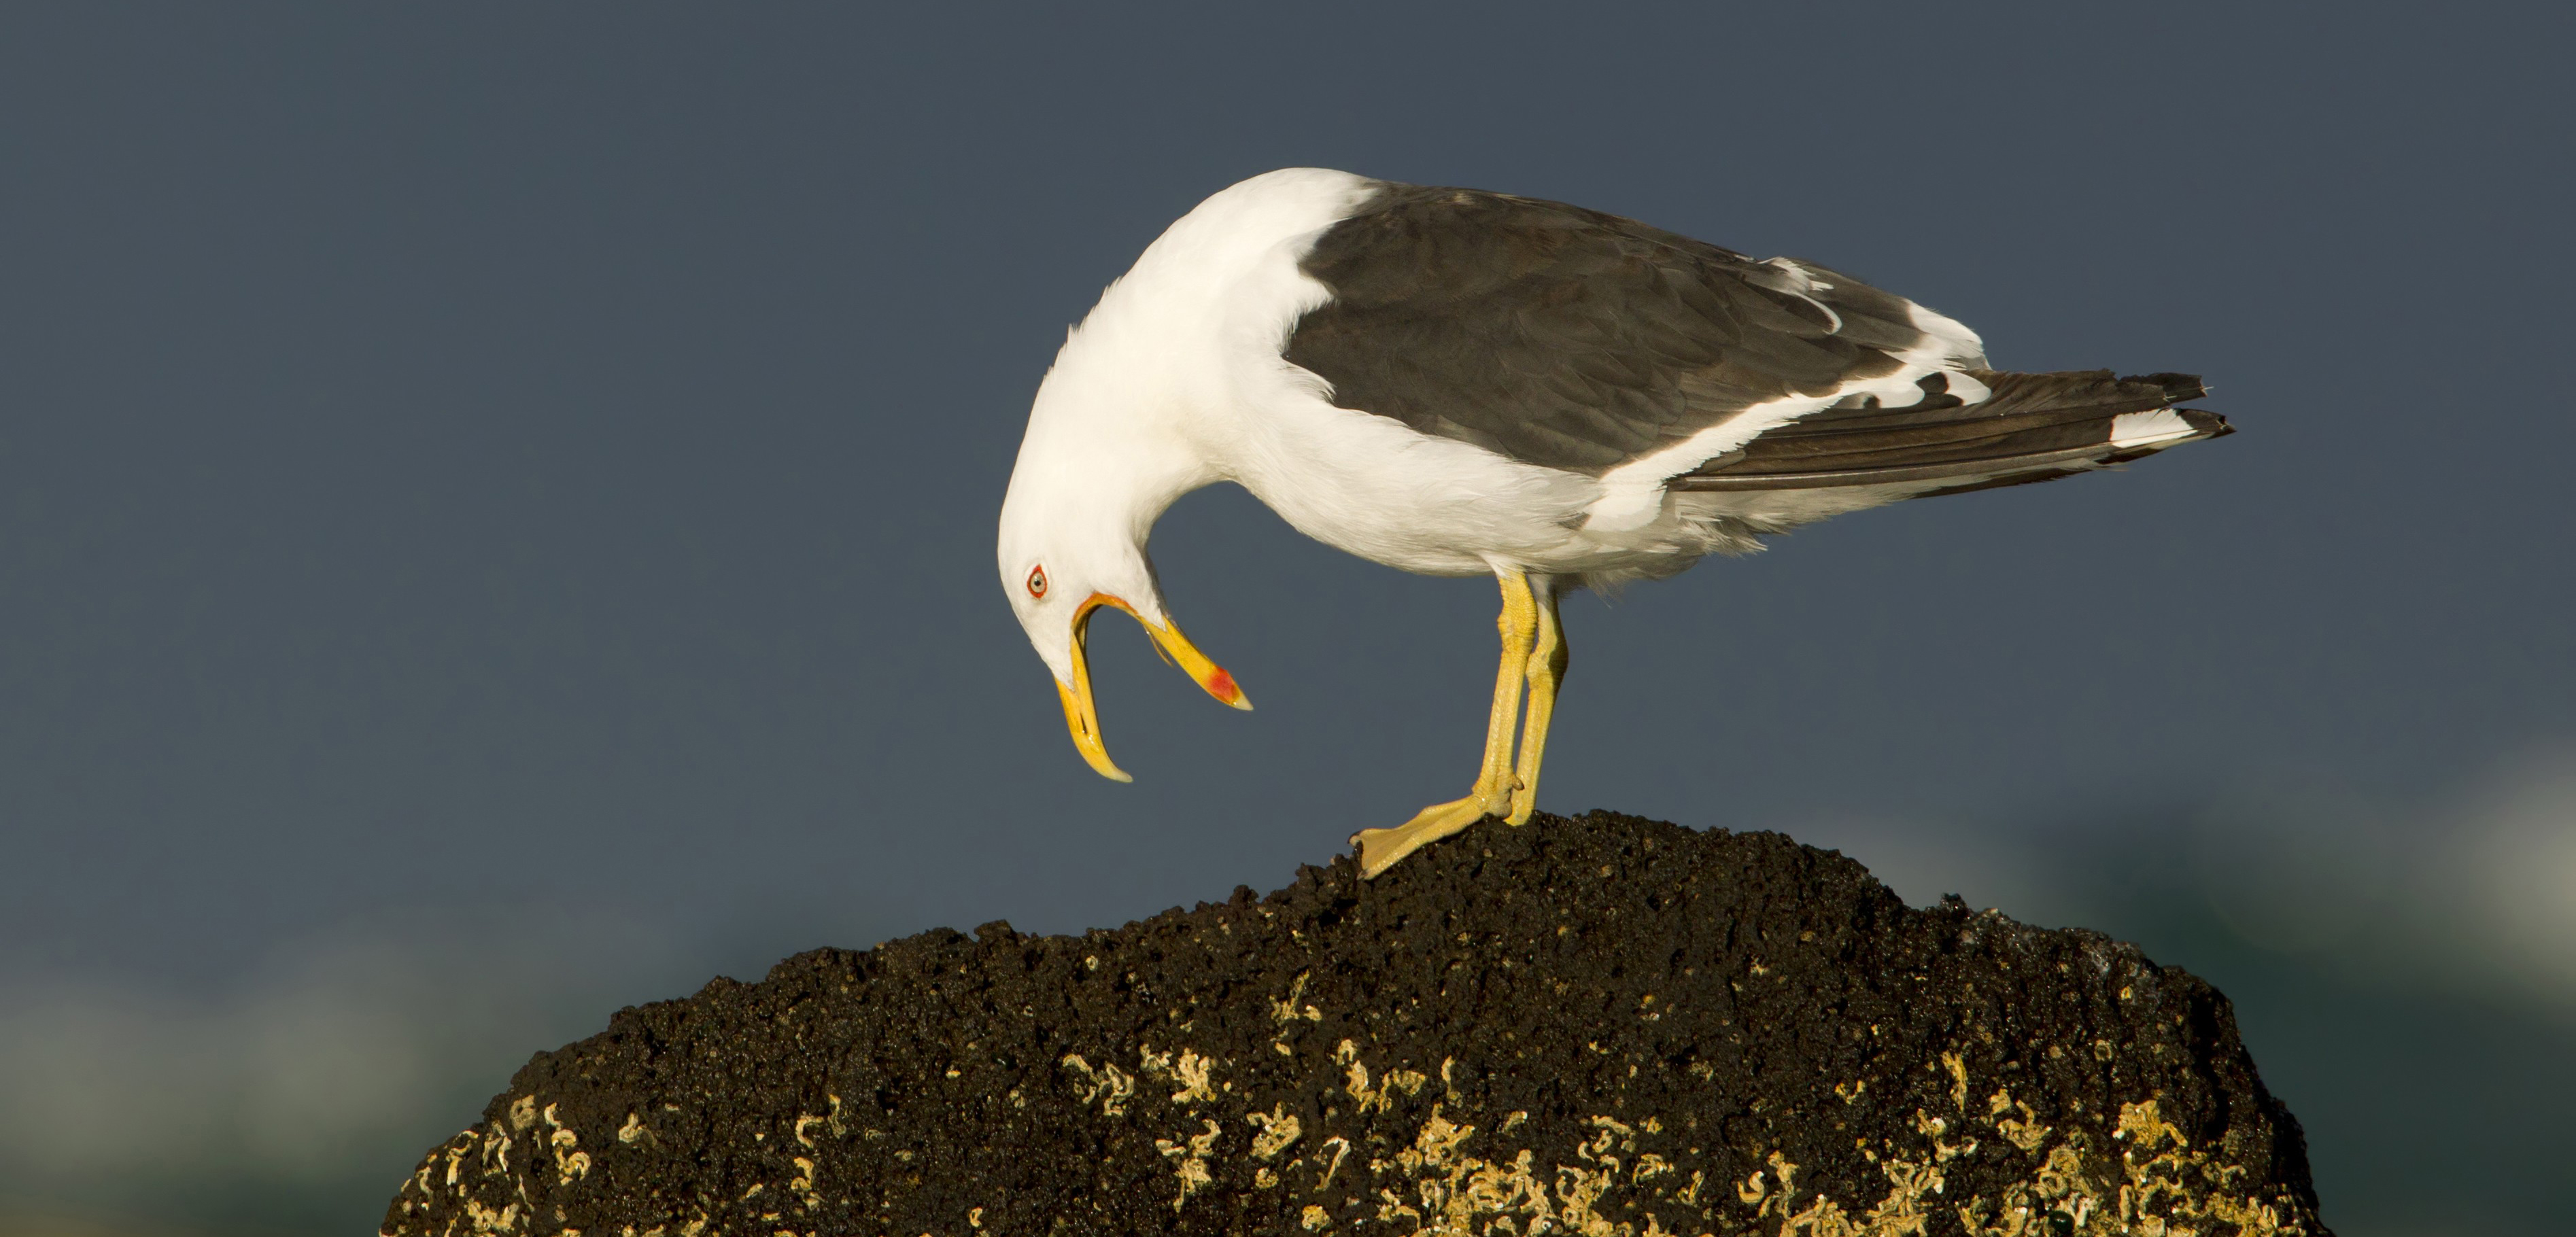 A kelp gull calling for blood, probably. Photo by Rob Drummond/BIA/Minden Pictures/Corbis